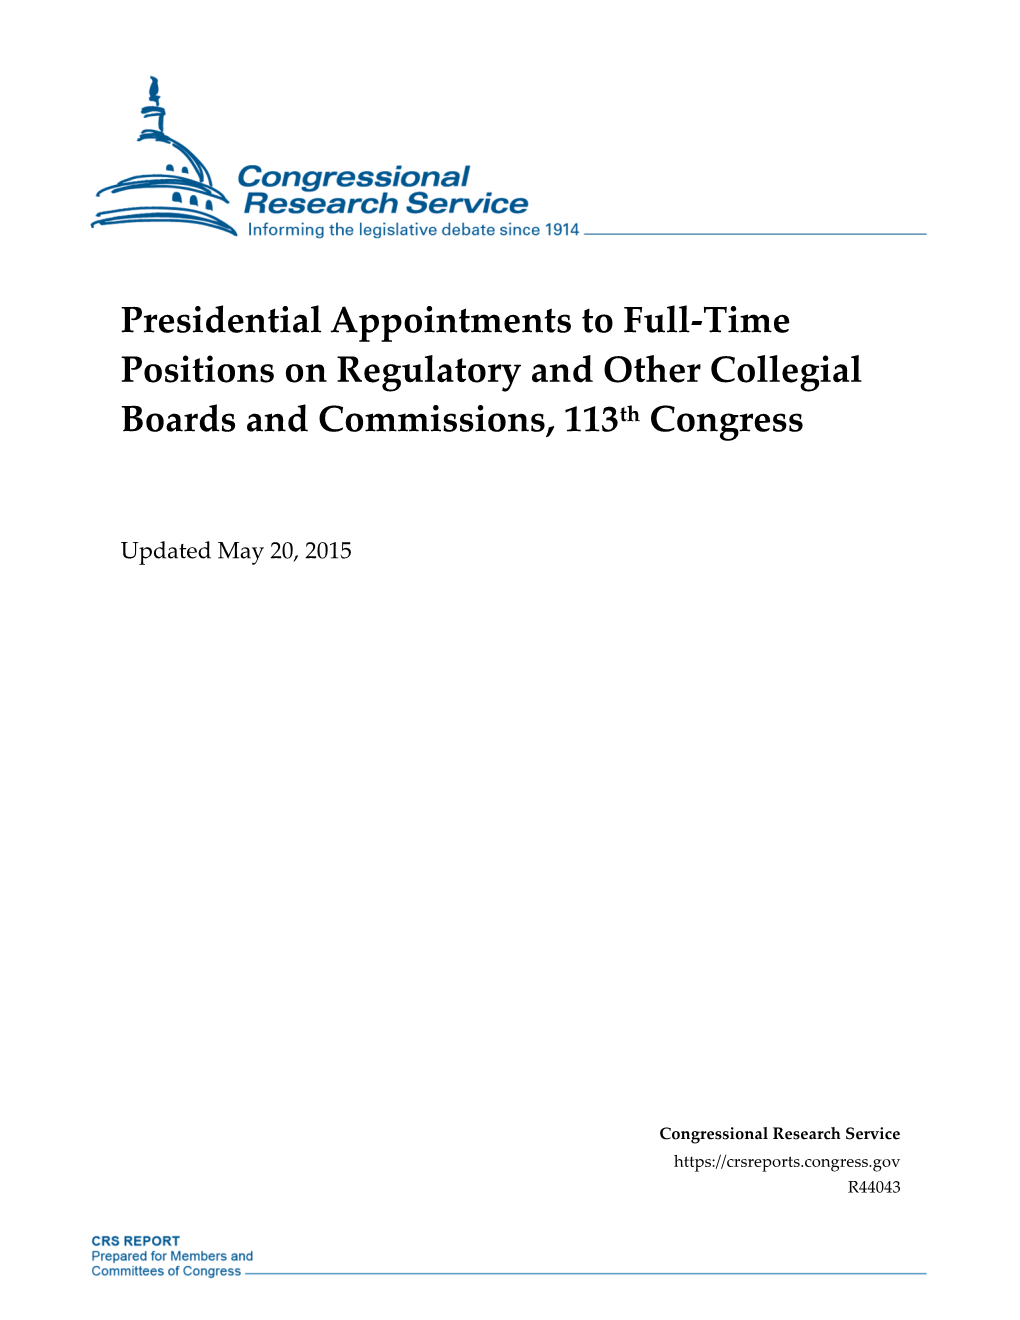 Presidential Appointments to Full-Time Positions on Regulatory and Other Collegial Boards and Commissions, 113Th Congress